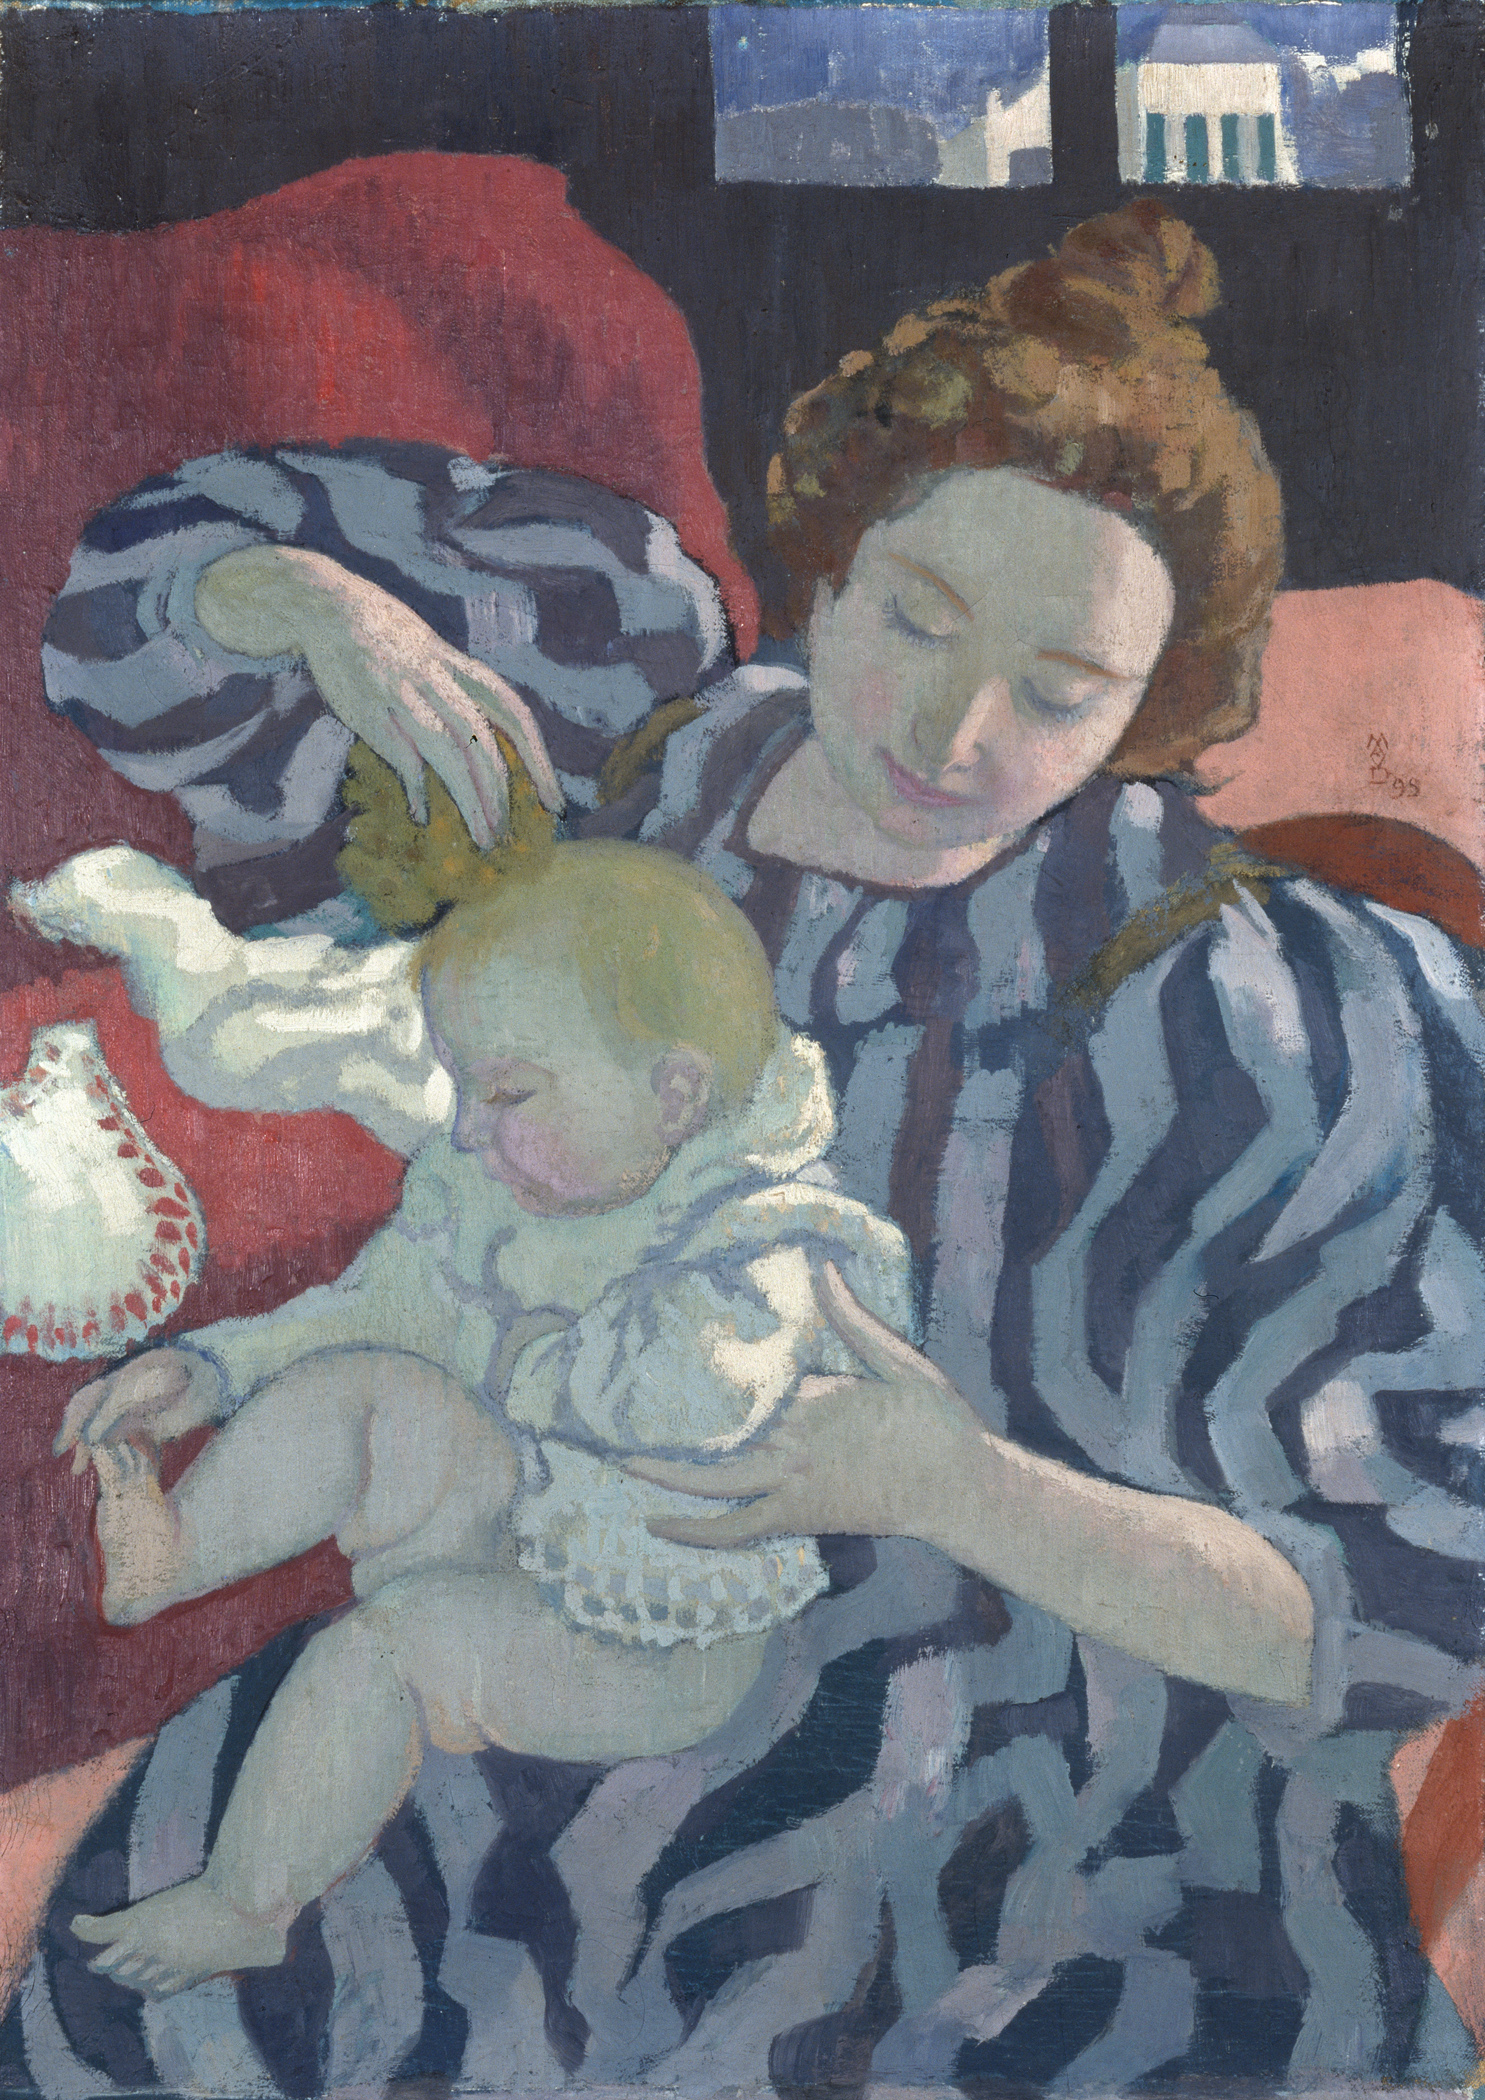 "Washing the Baby," 1899, by Maurice Denis, will be part of the Cleveland Musem of Art's upcoming exhibition on the French Nabis school. Private collection. Image © Catalogue raisonné Maurice Denis. © 2021 Artists Rights Society (ARS), New York / ADAGP, Paris